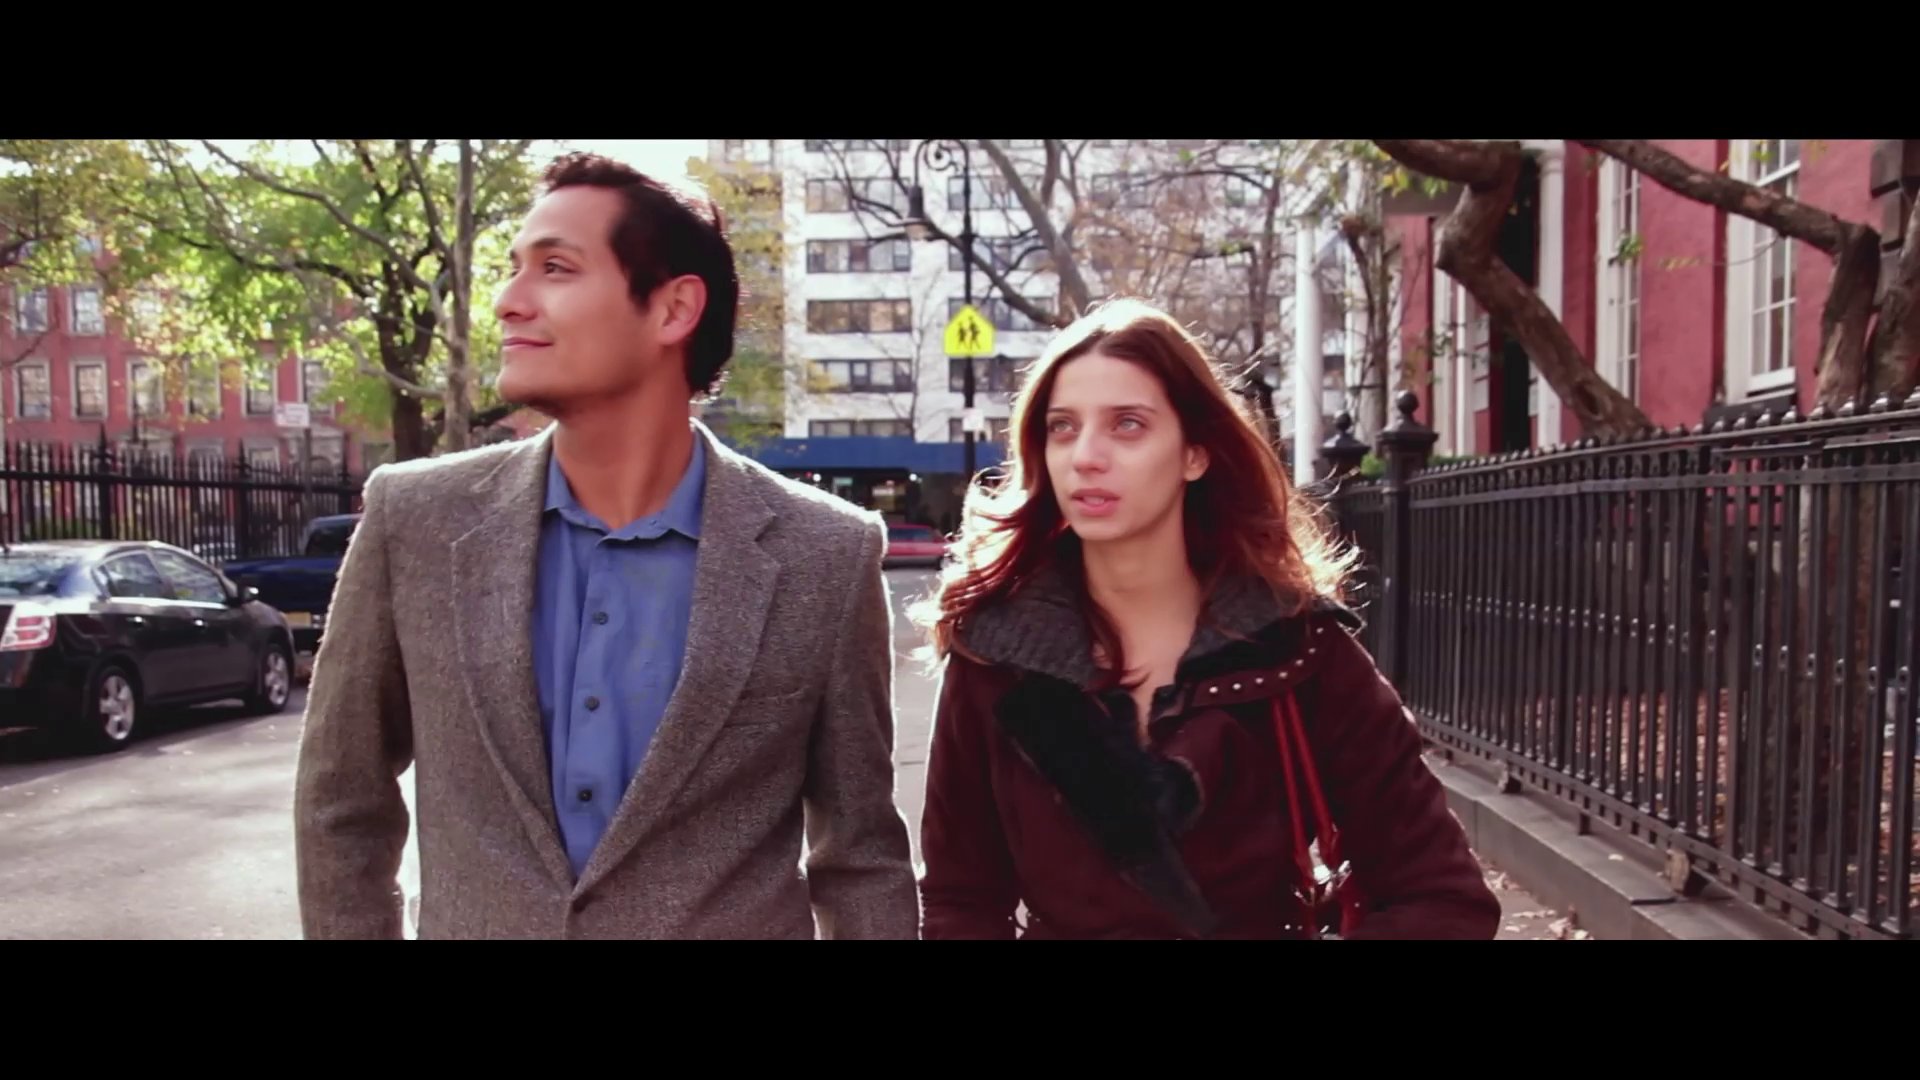 Jaime Zevallos and Angela Sarafyan still from the feature film 